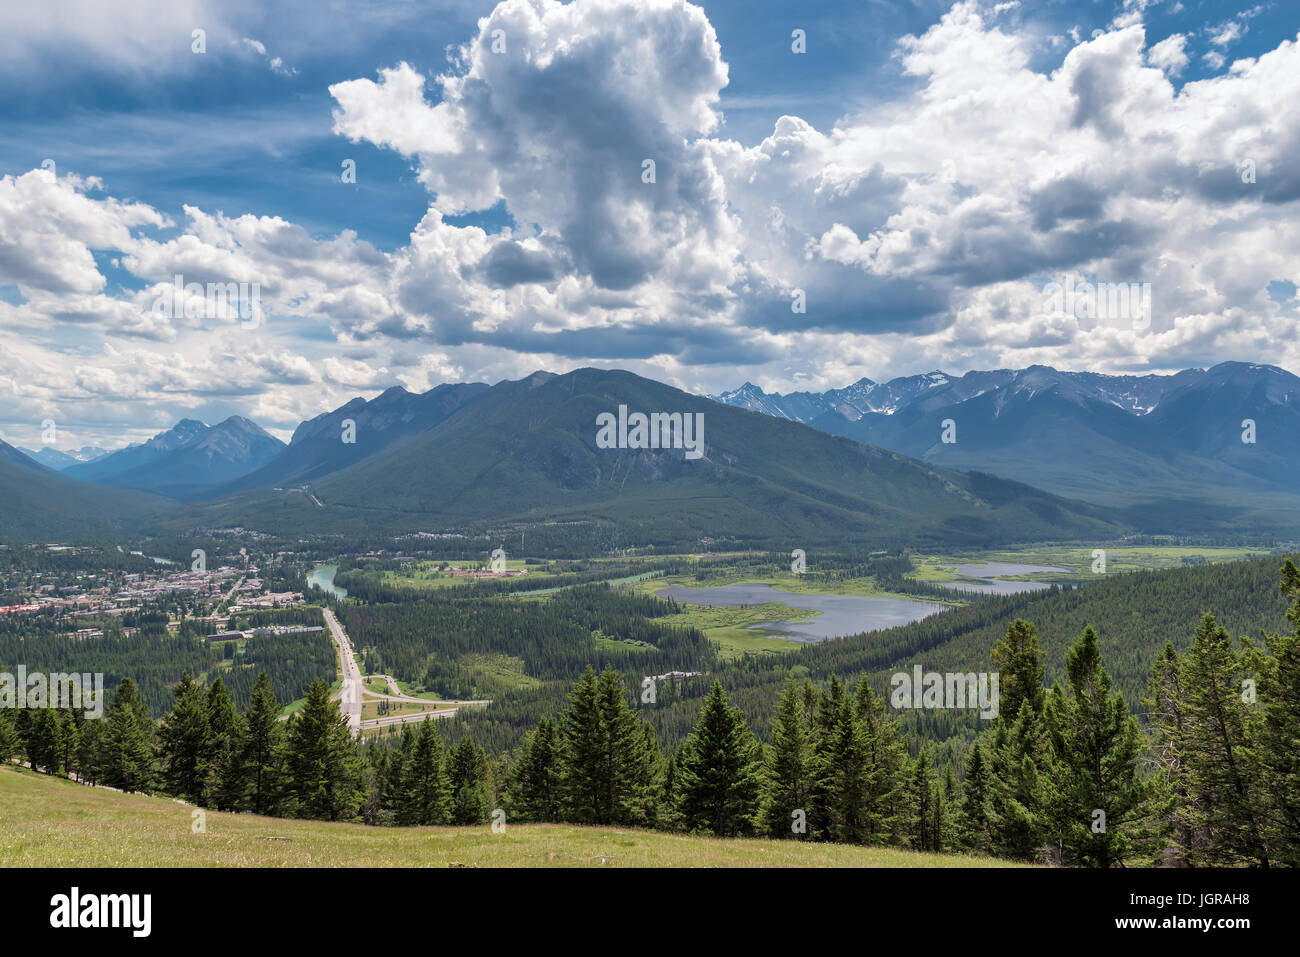 The city of Banff in the valley between the mountains, Alberta, Canada. Stock Photo